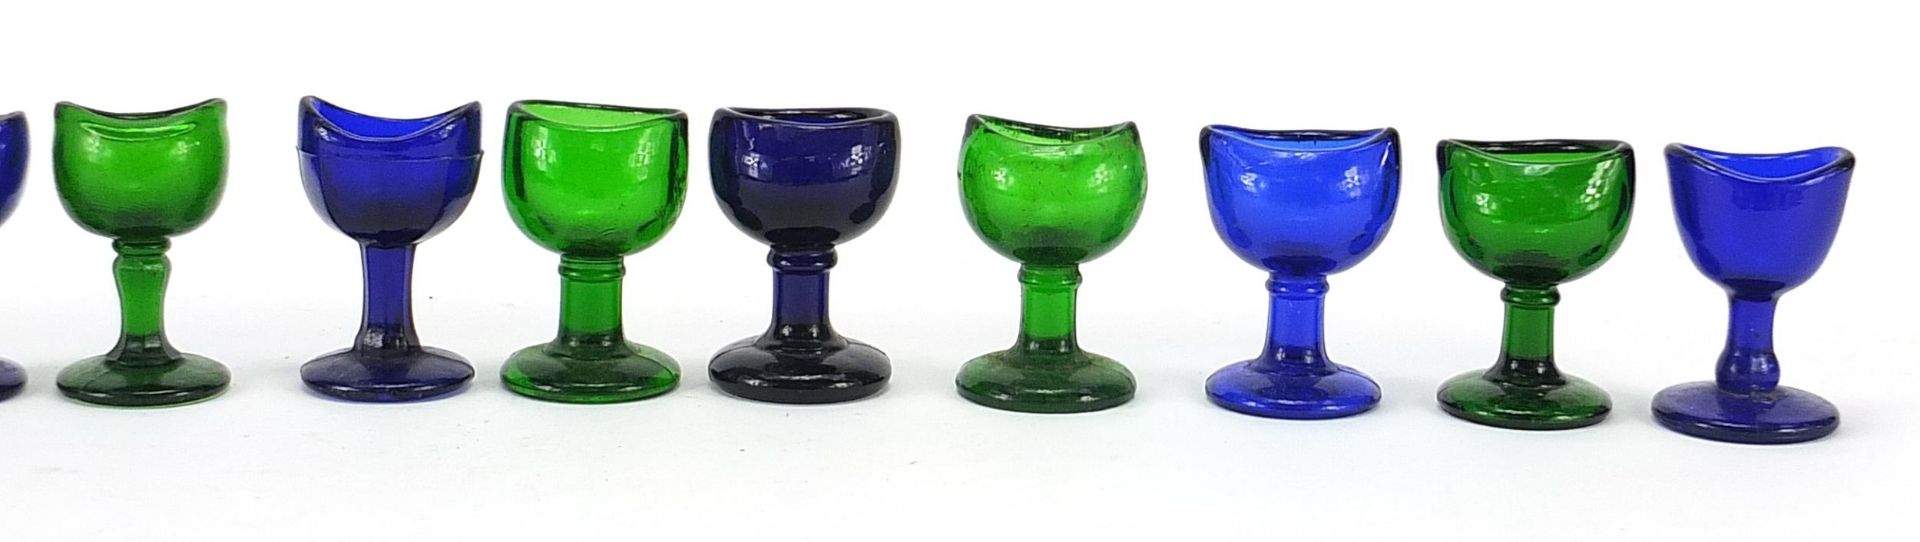 Eleven antique glass eye baths including six Bristol blue examples, each approximately 7.5cm high - Image 3 of 3